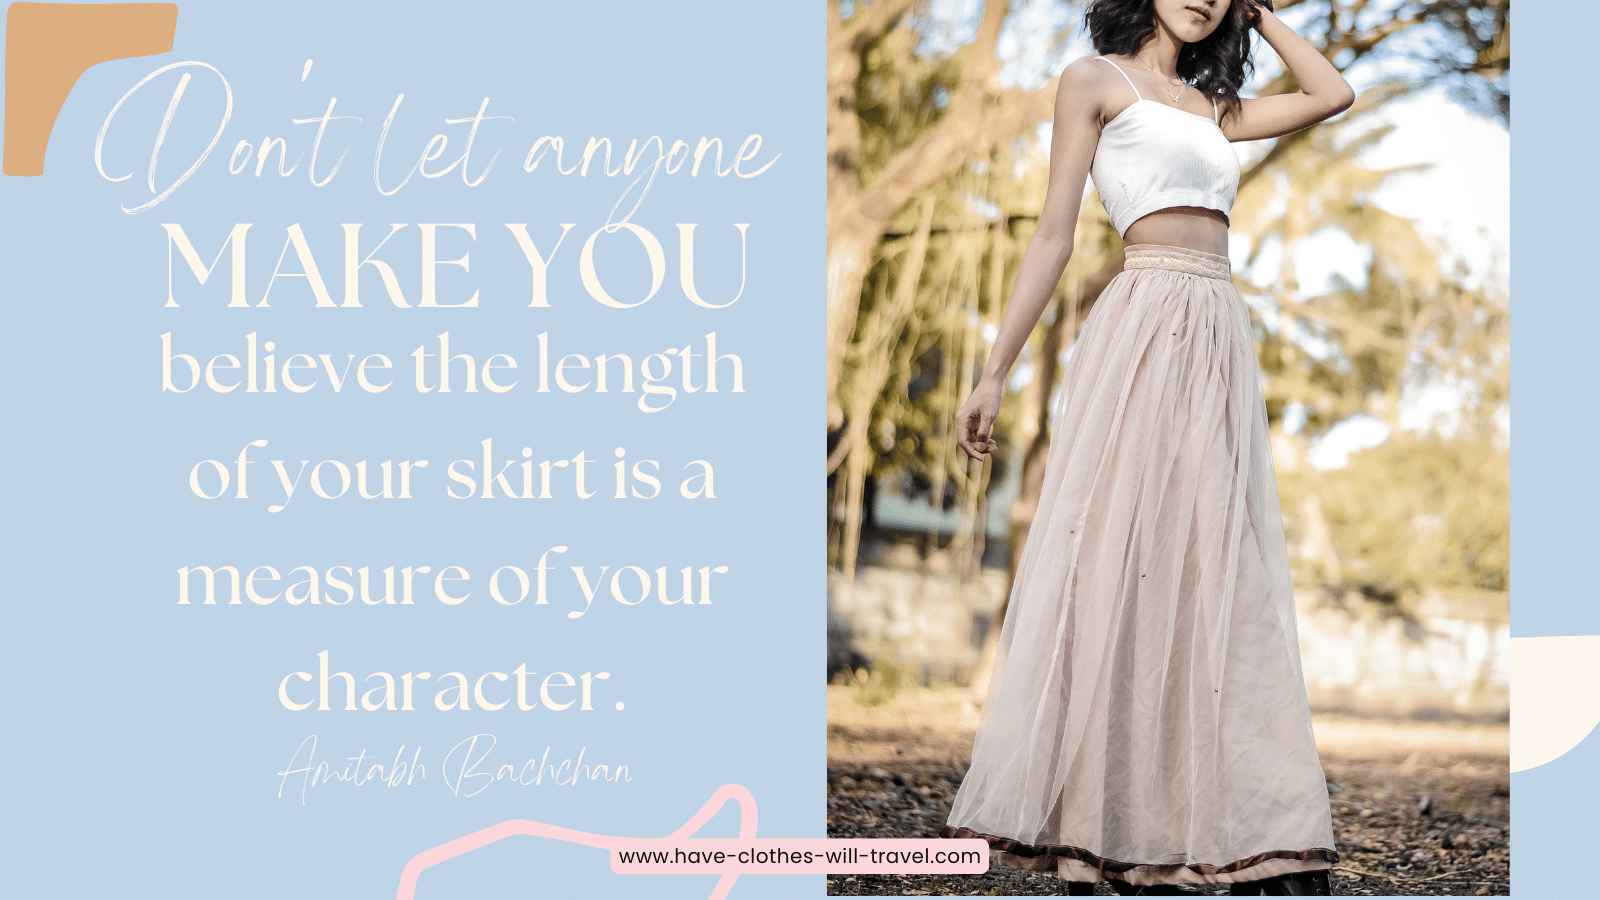 Skirt quotes for instagram captions